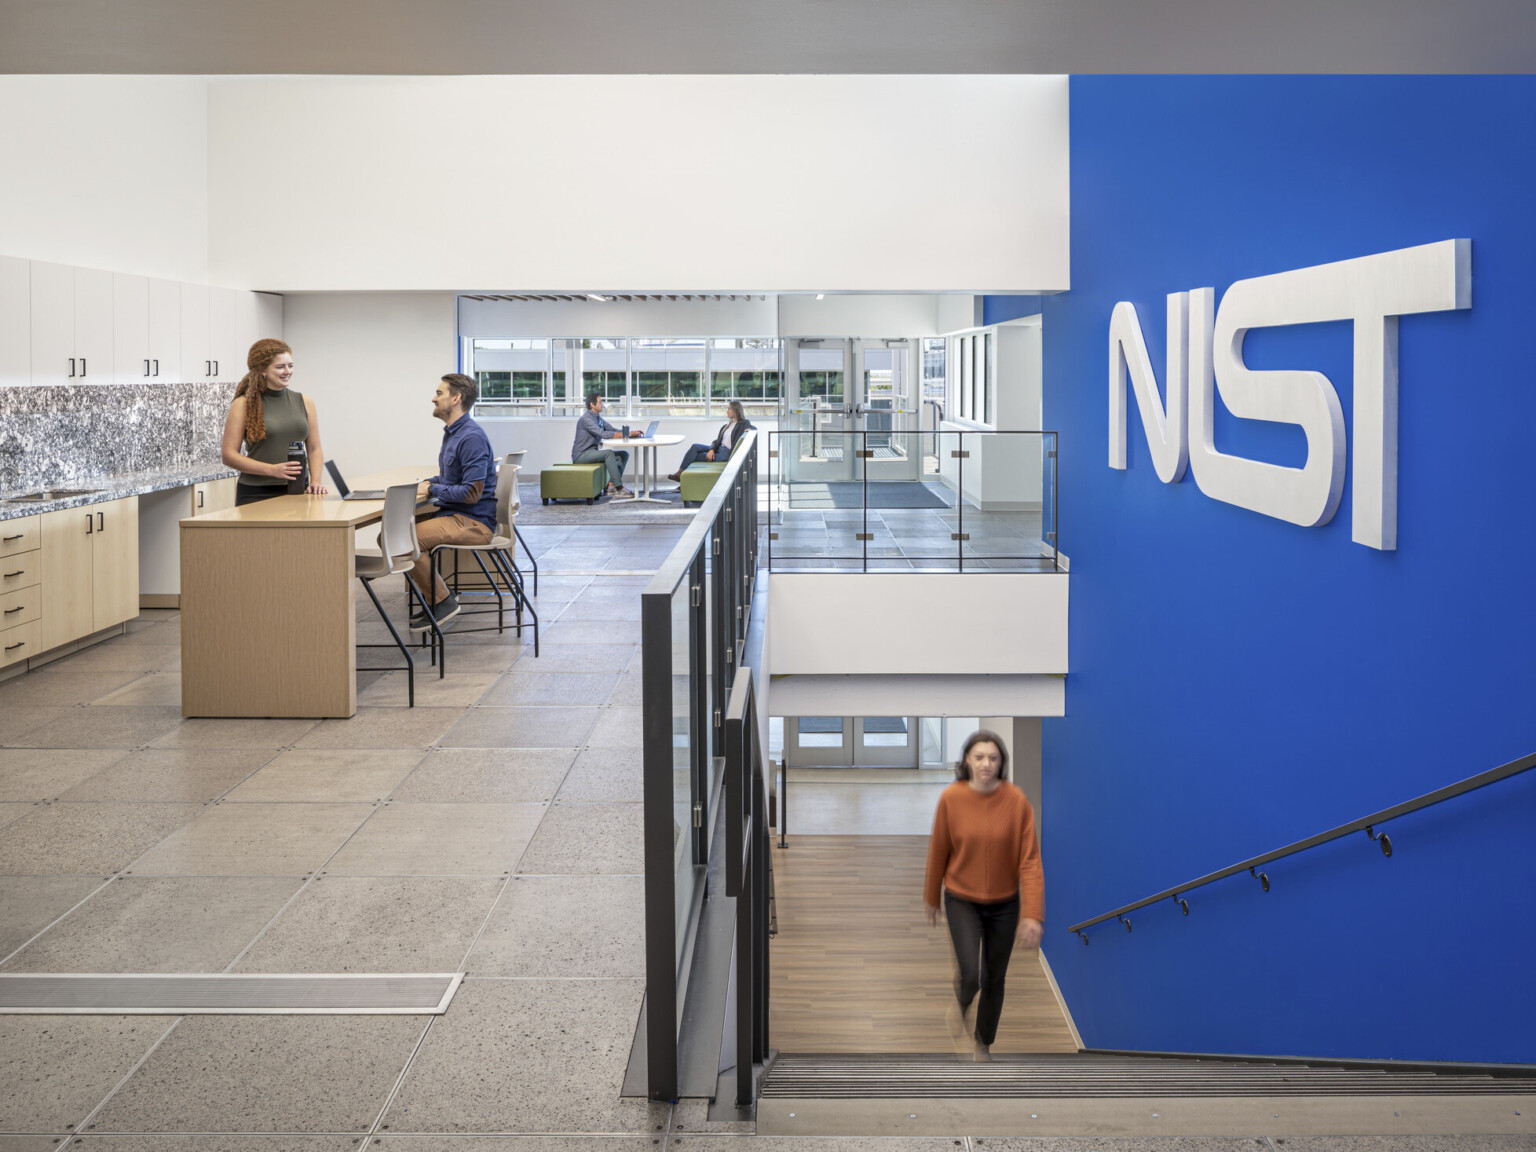 Woman in a orange shirt walking up a staircase with a blue wall to the right with letters NIST. Two couples at the top of the stairs working in collaborative areas